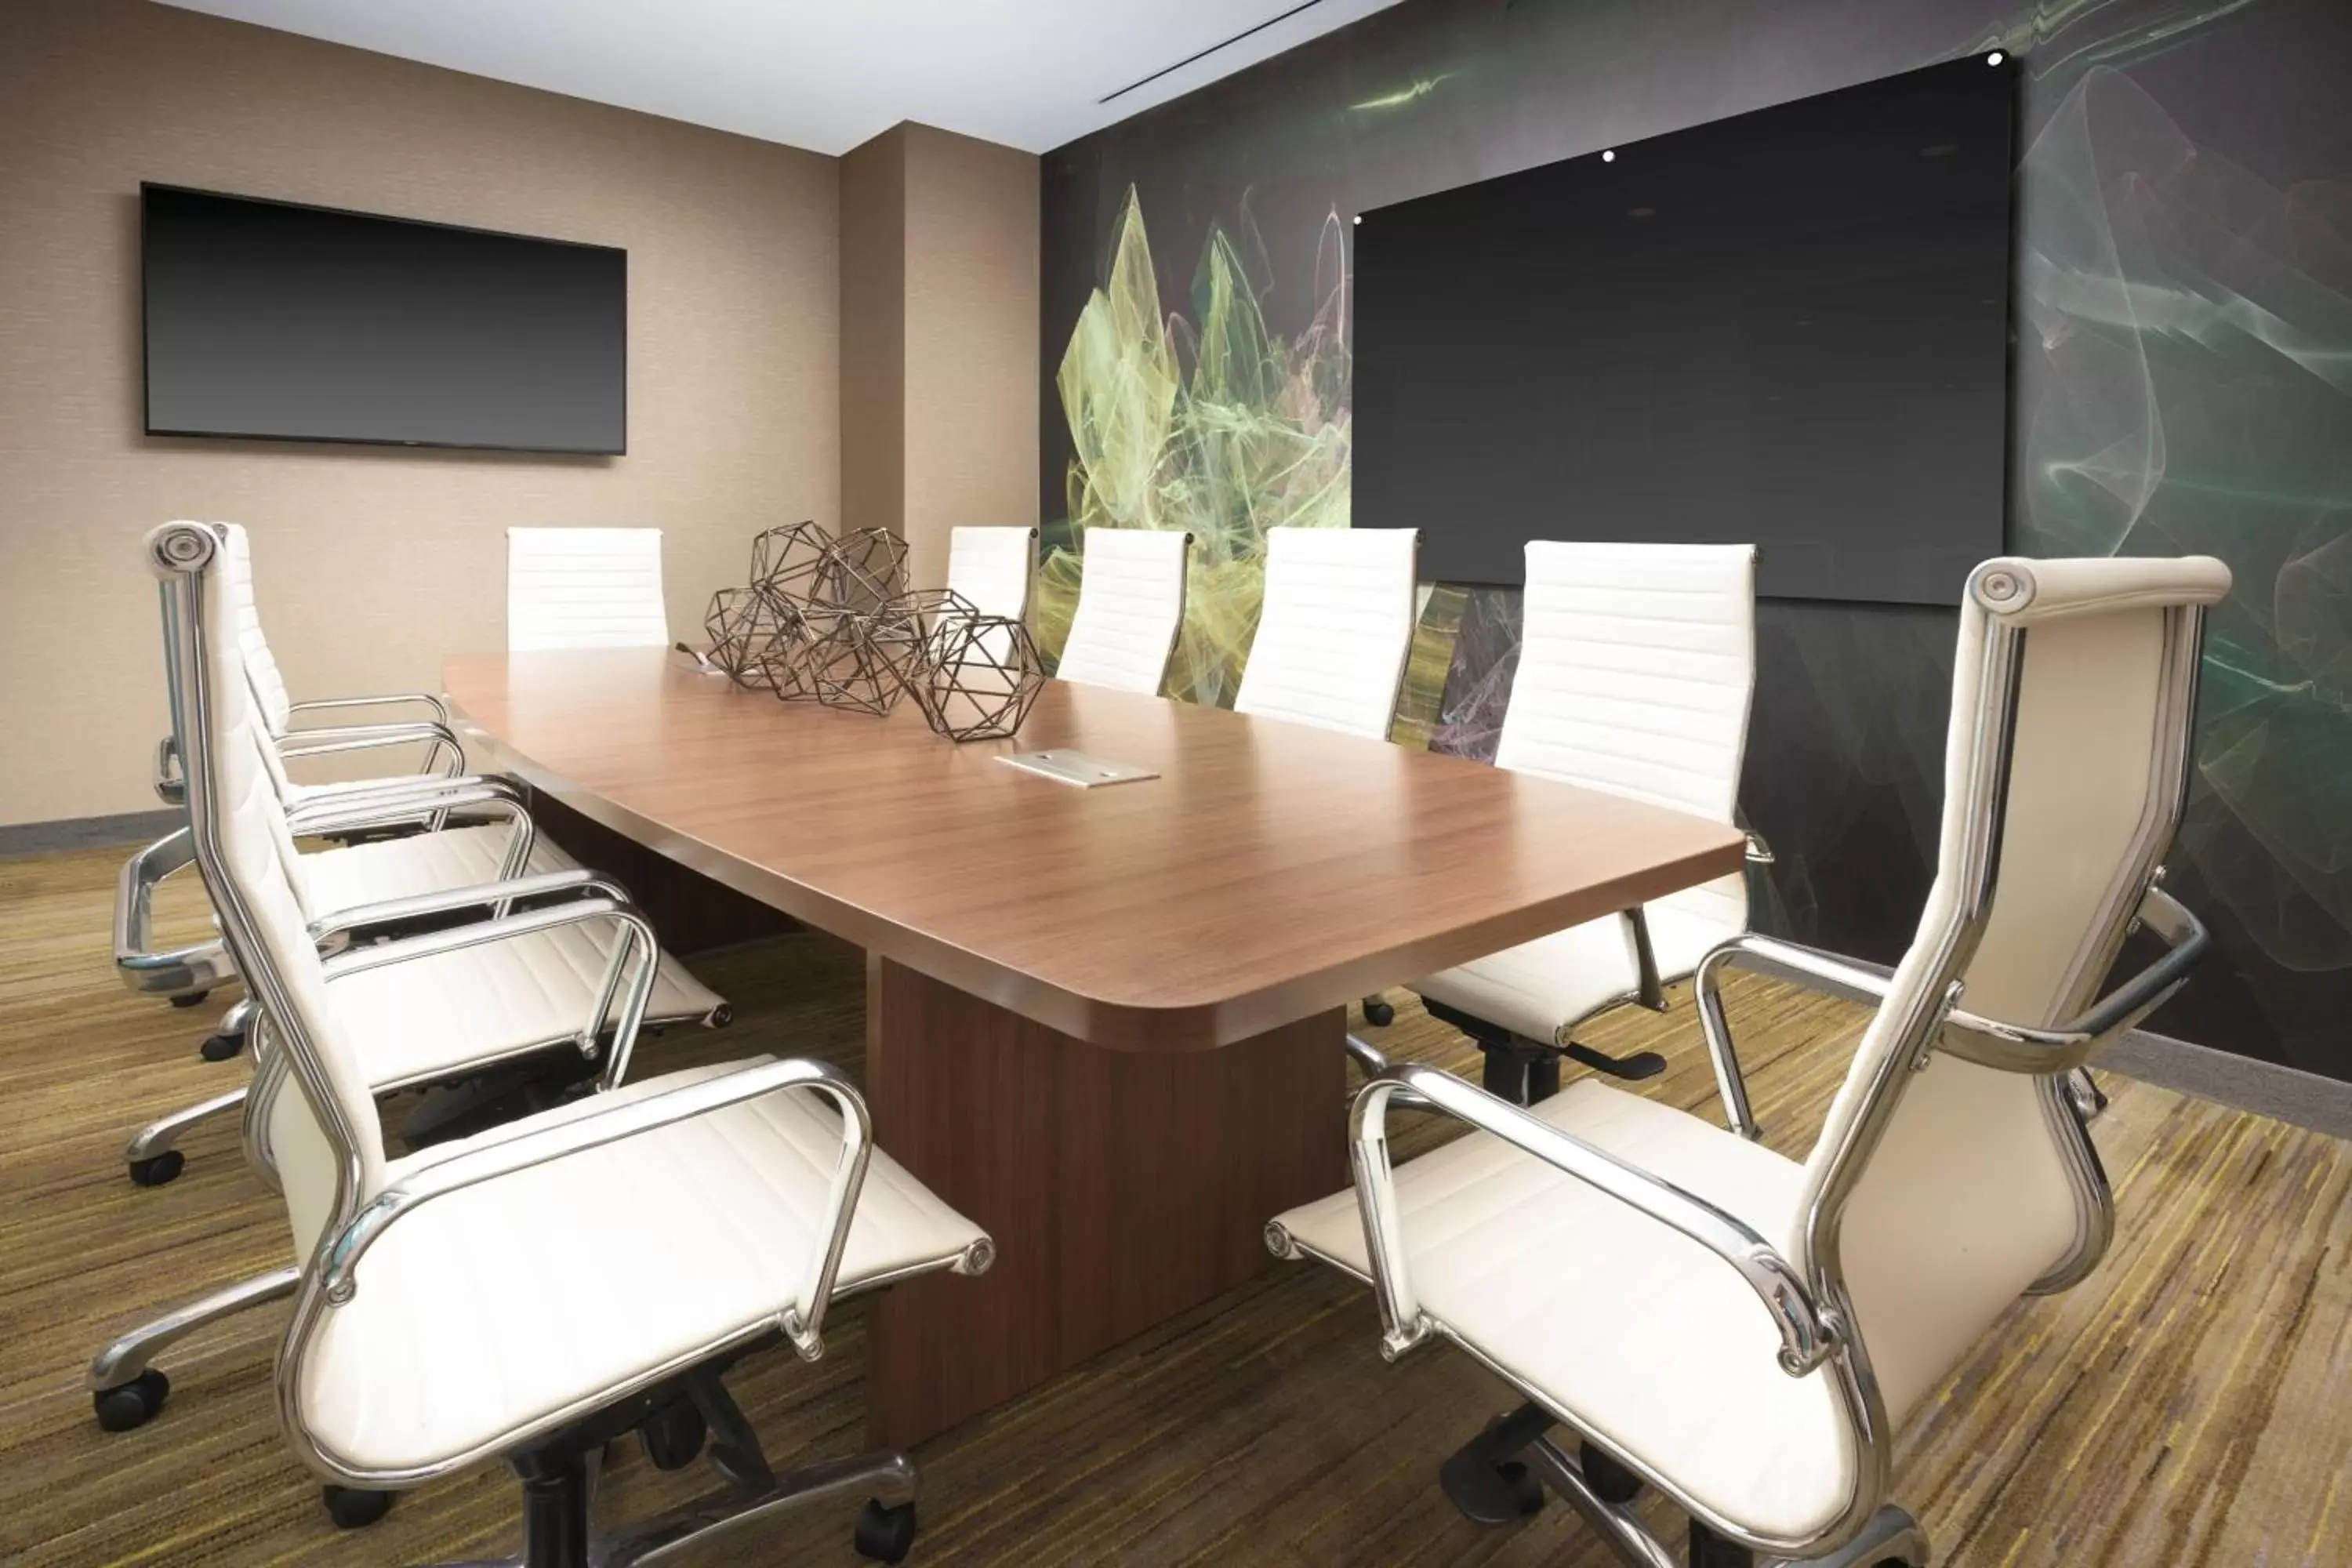 Meeting/conference room in Courtyard by Marriott Nashville SE/Murfreesboro